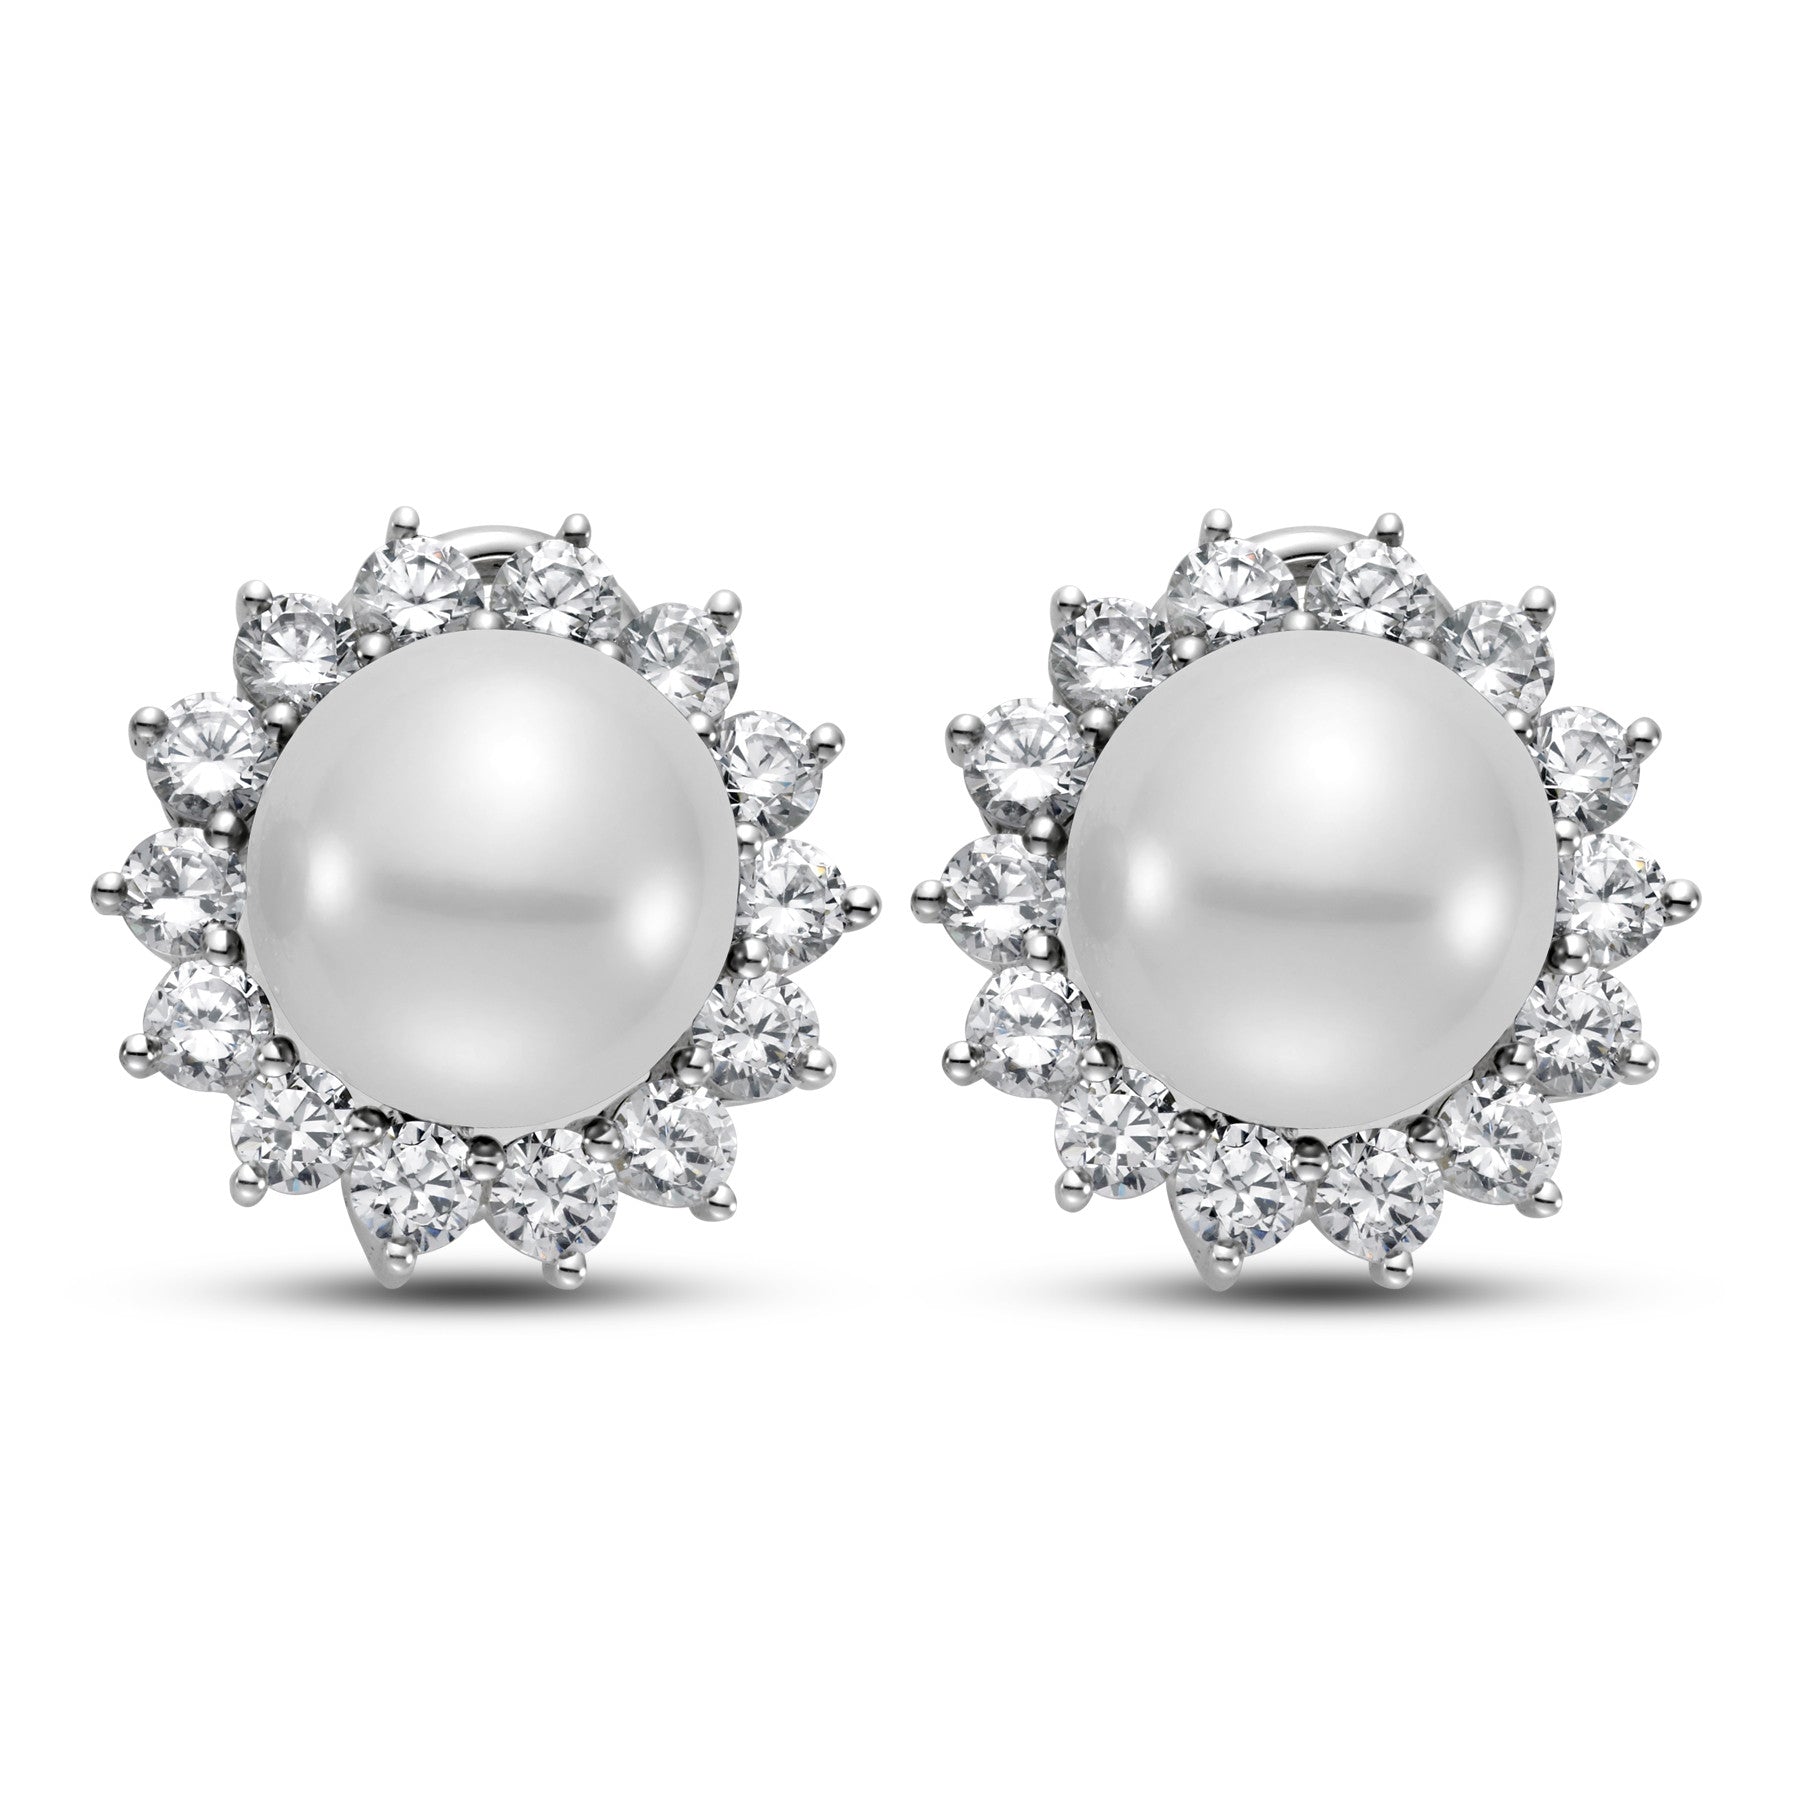 10.5 - 11.5mm White South Sea Pearl Earrings with 2.3 CTTW Diamonds - Isaac Westman - 1